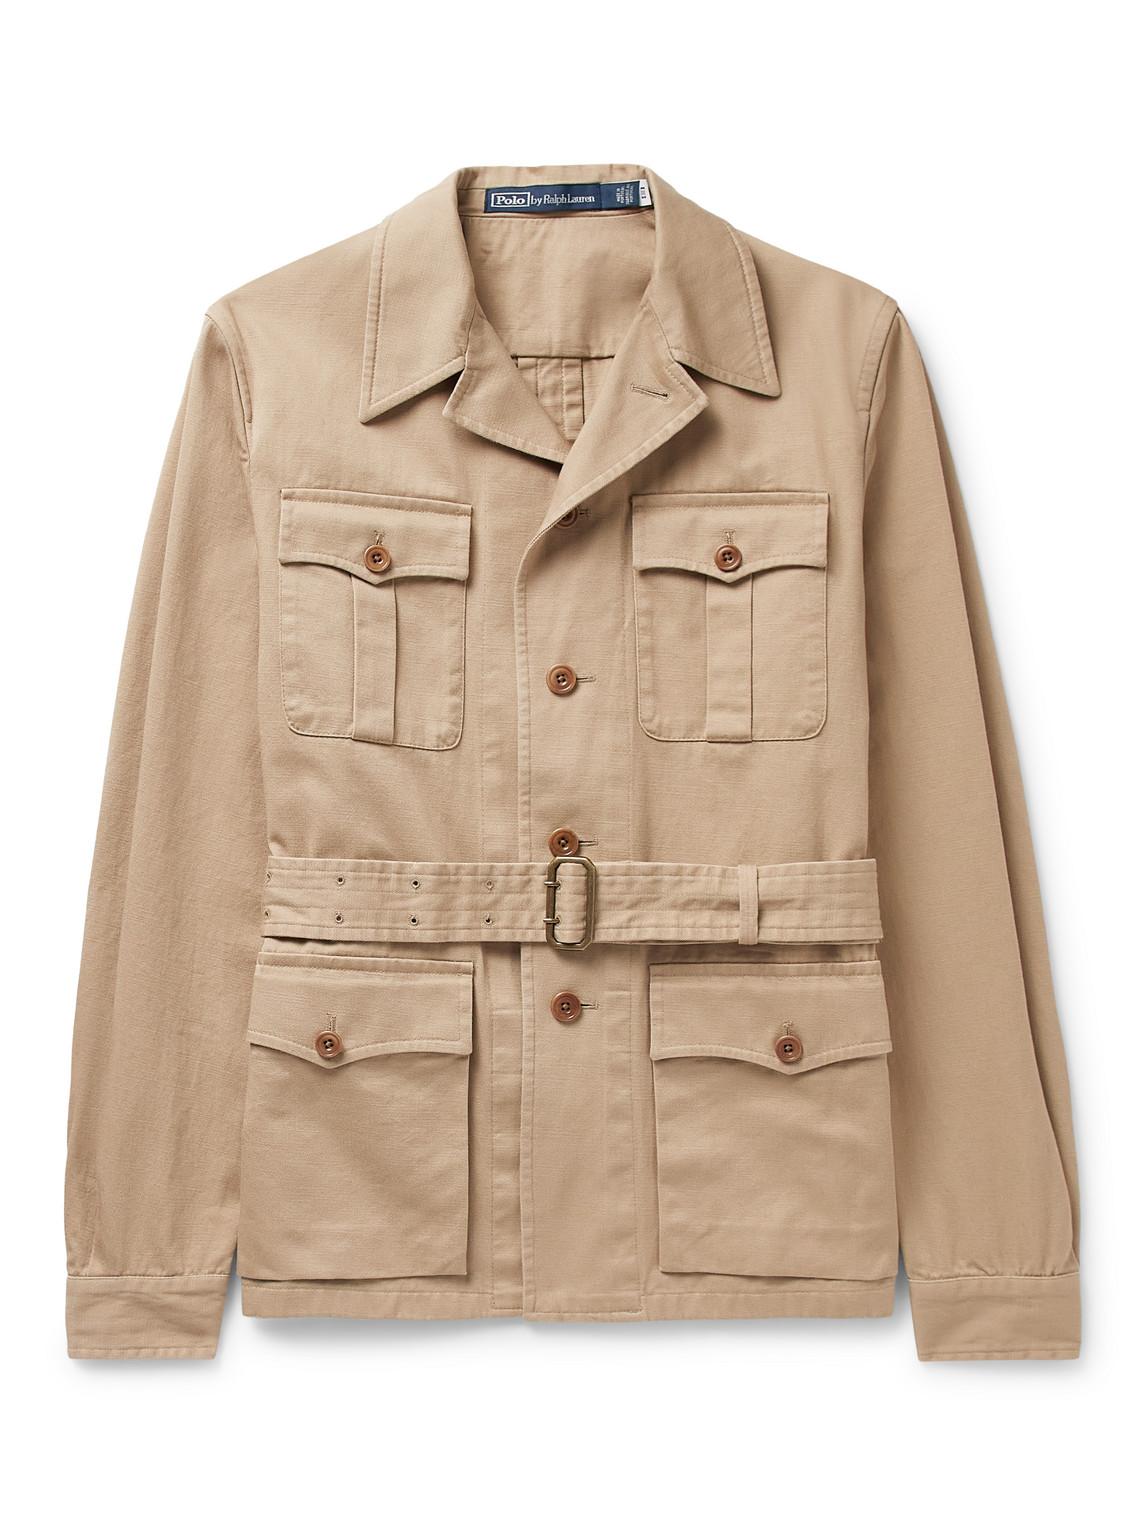 Polo Ralph Lauren Belted Cotton-twill Jacket in Natural for Men | Lyst